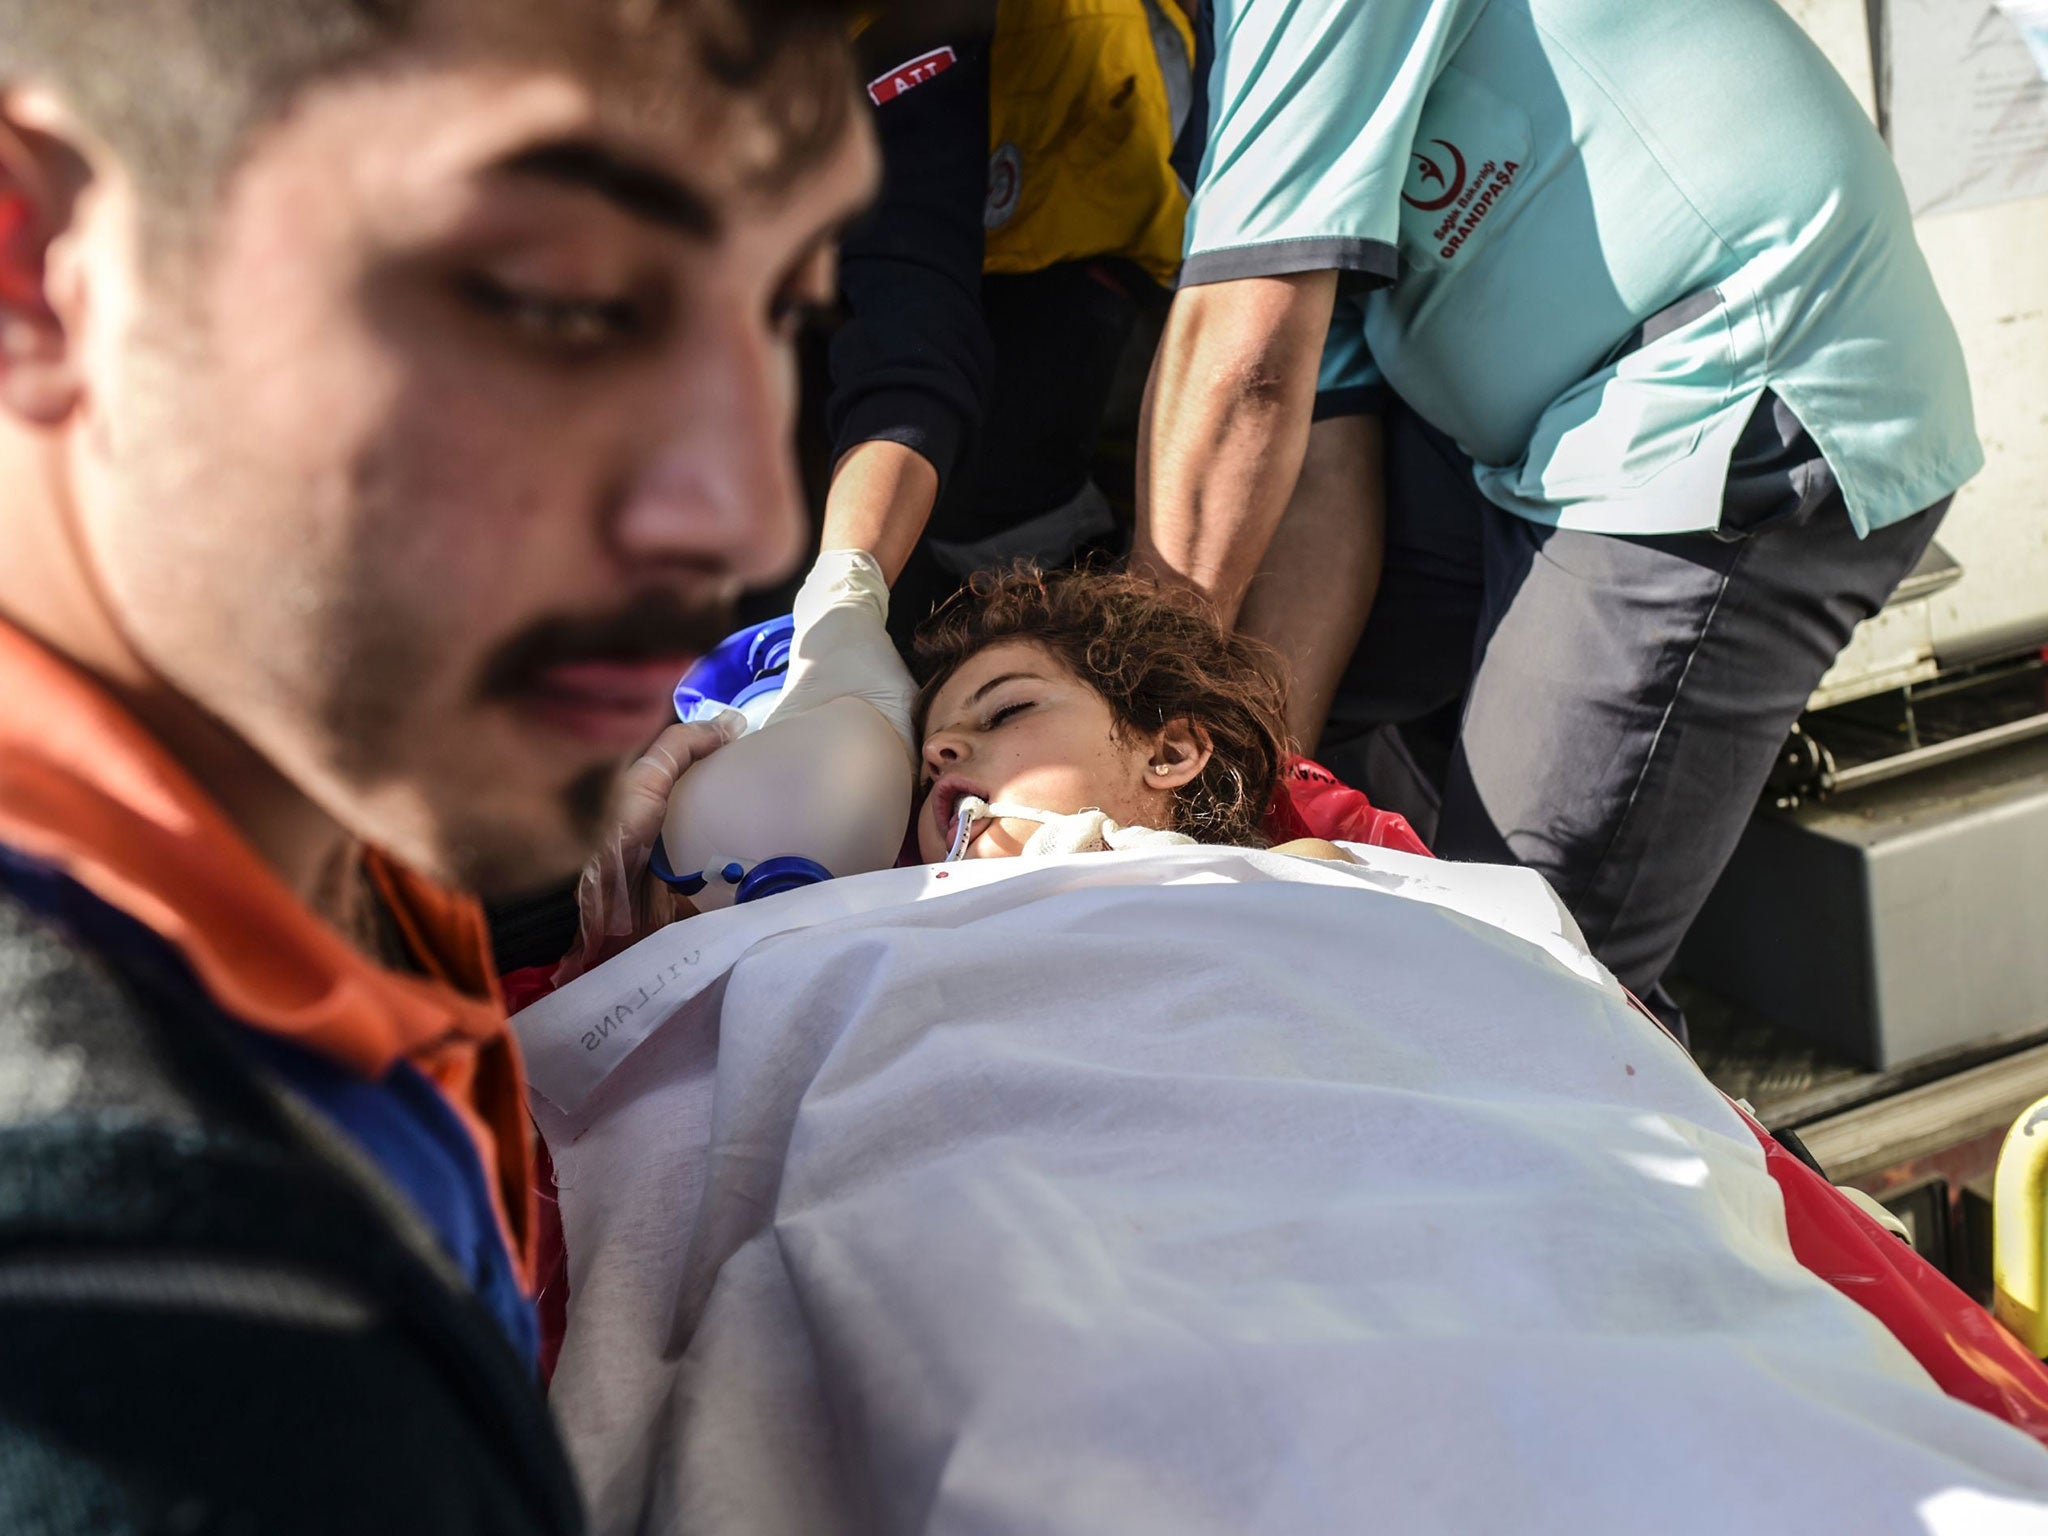 An injured Syrian child arriving from northern Syria is carried to Kilis hospital in south-central Turkey on February 15, 2016.